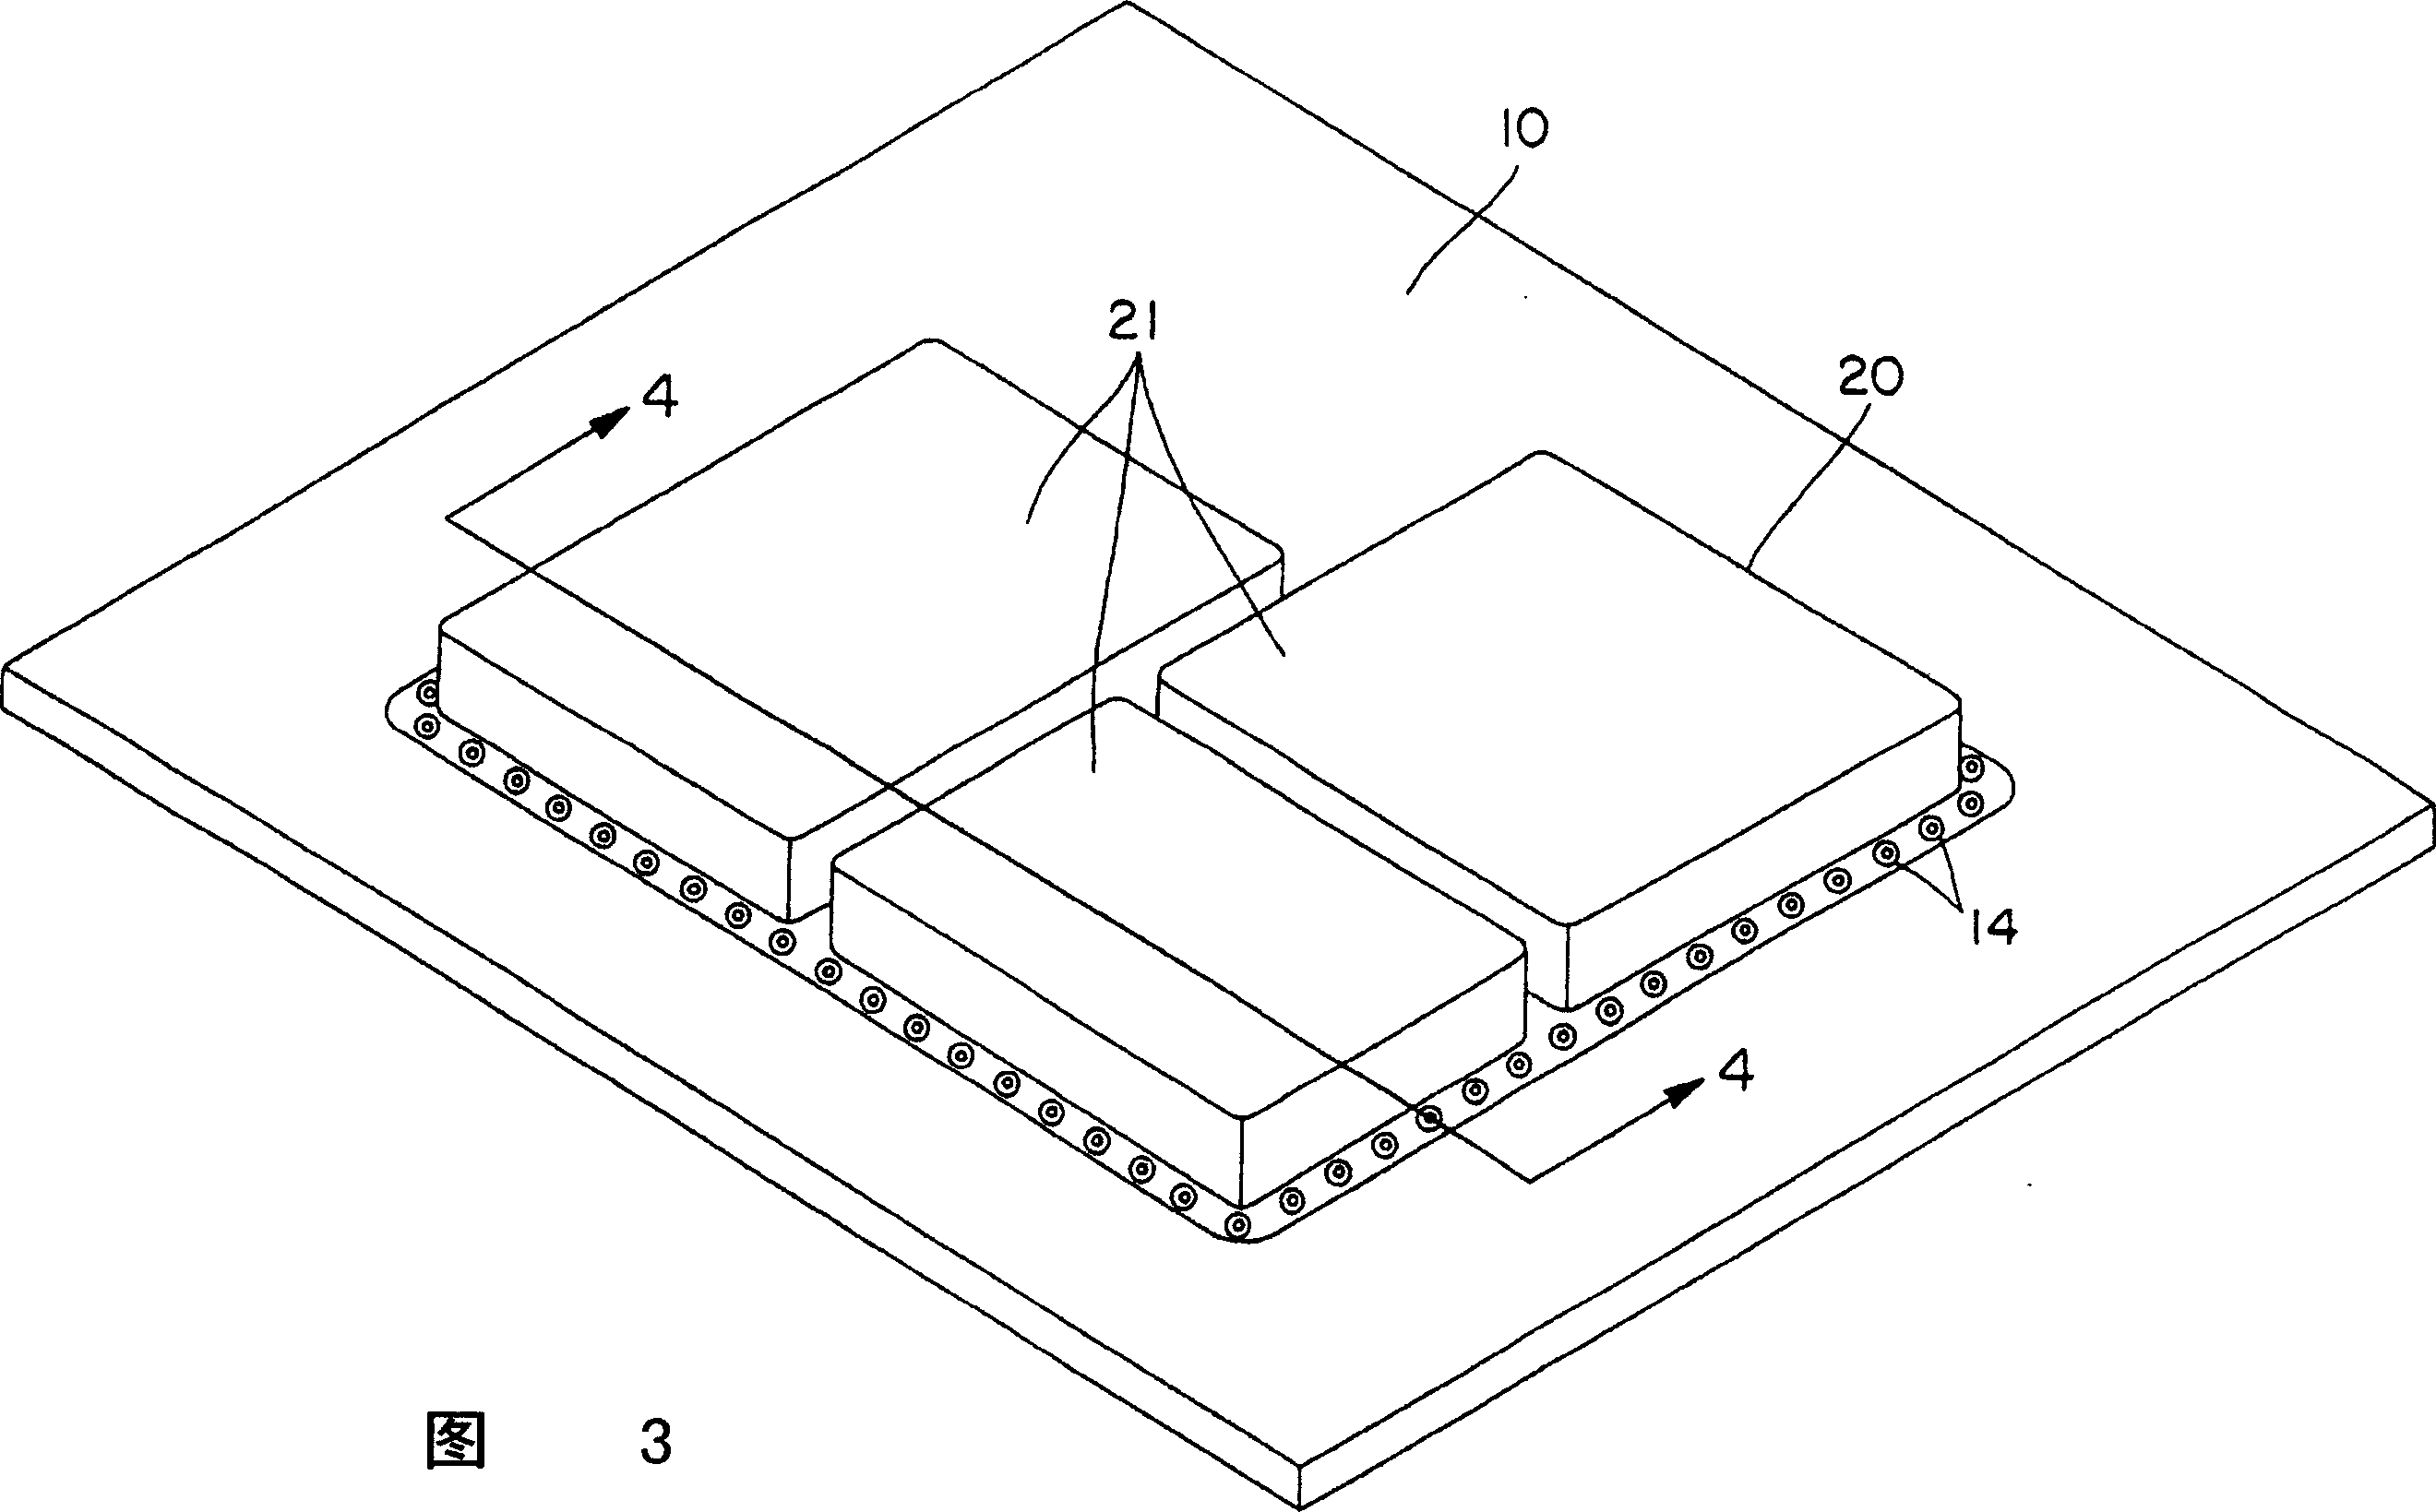 Board-level EMI shield with enhanced thermal dissipation